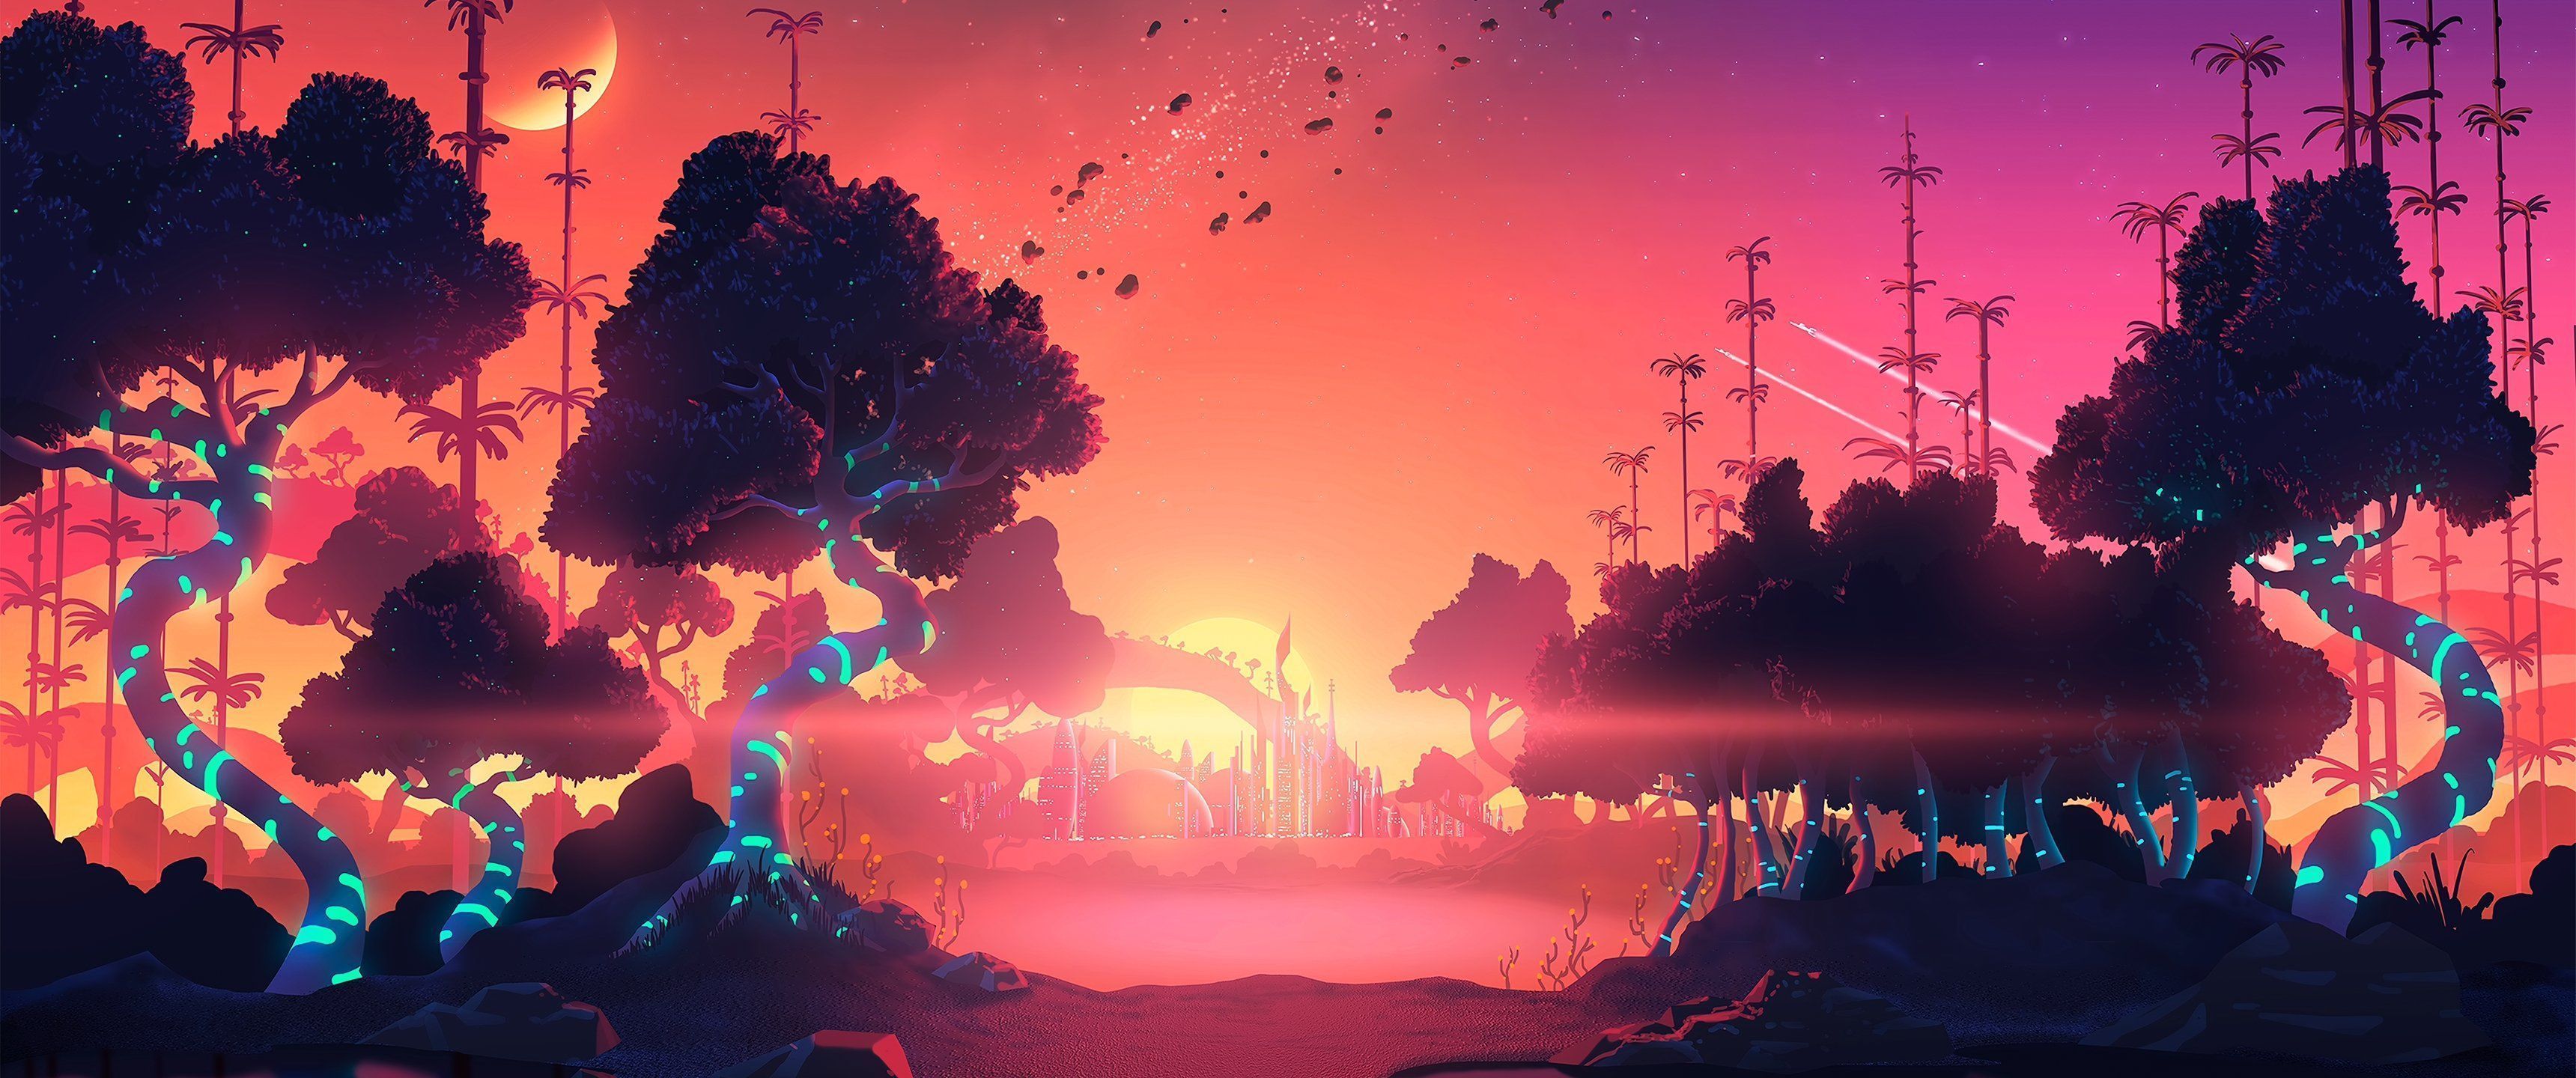 A digital painting of a sunset over a jungle with a pink and purple sky - 3440x1440